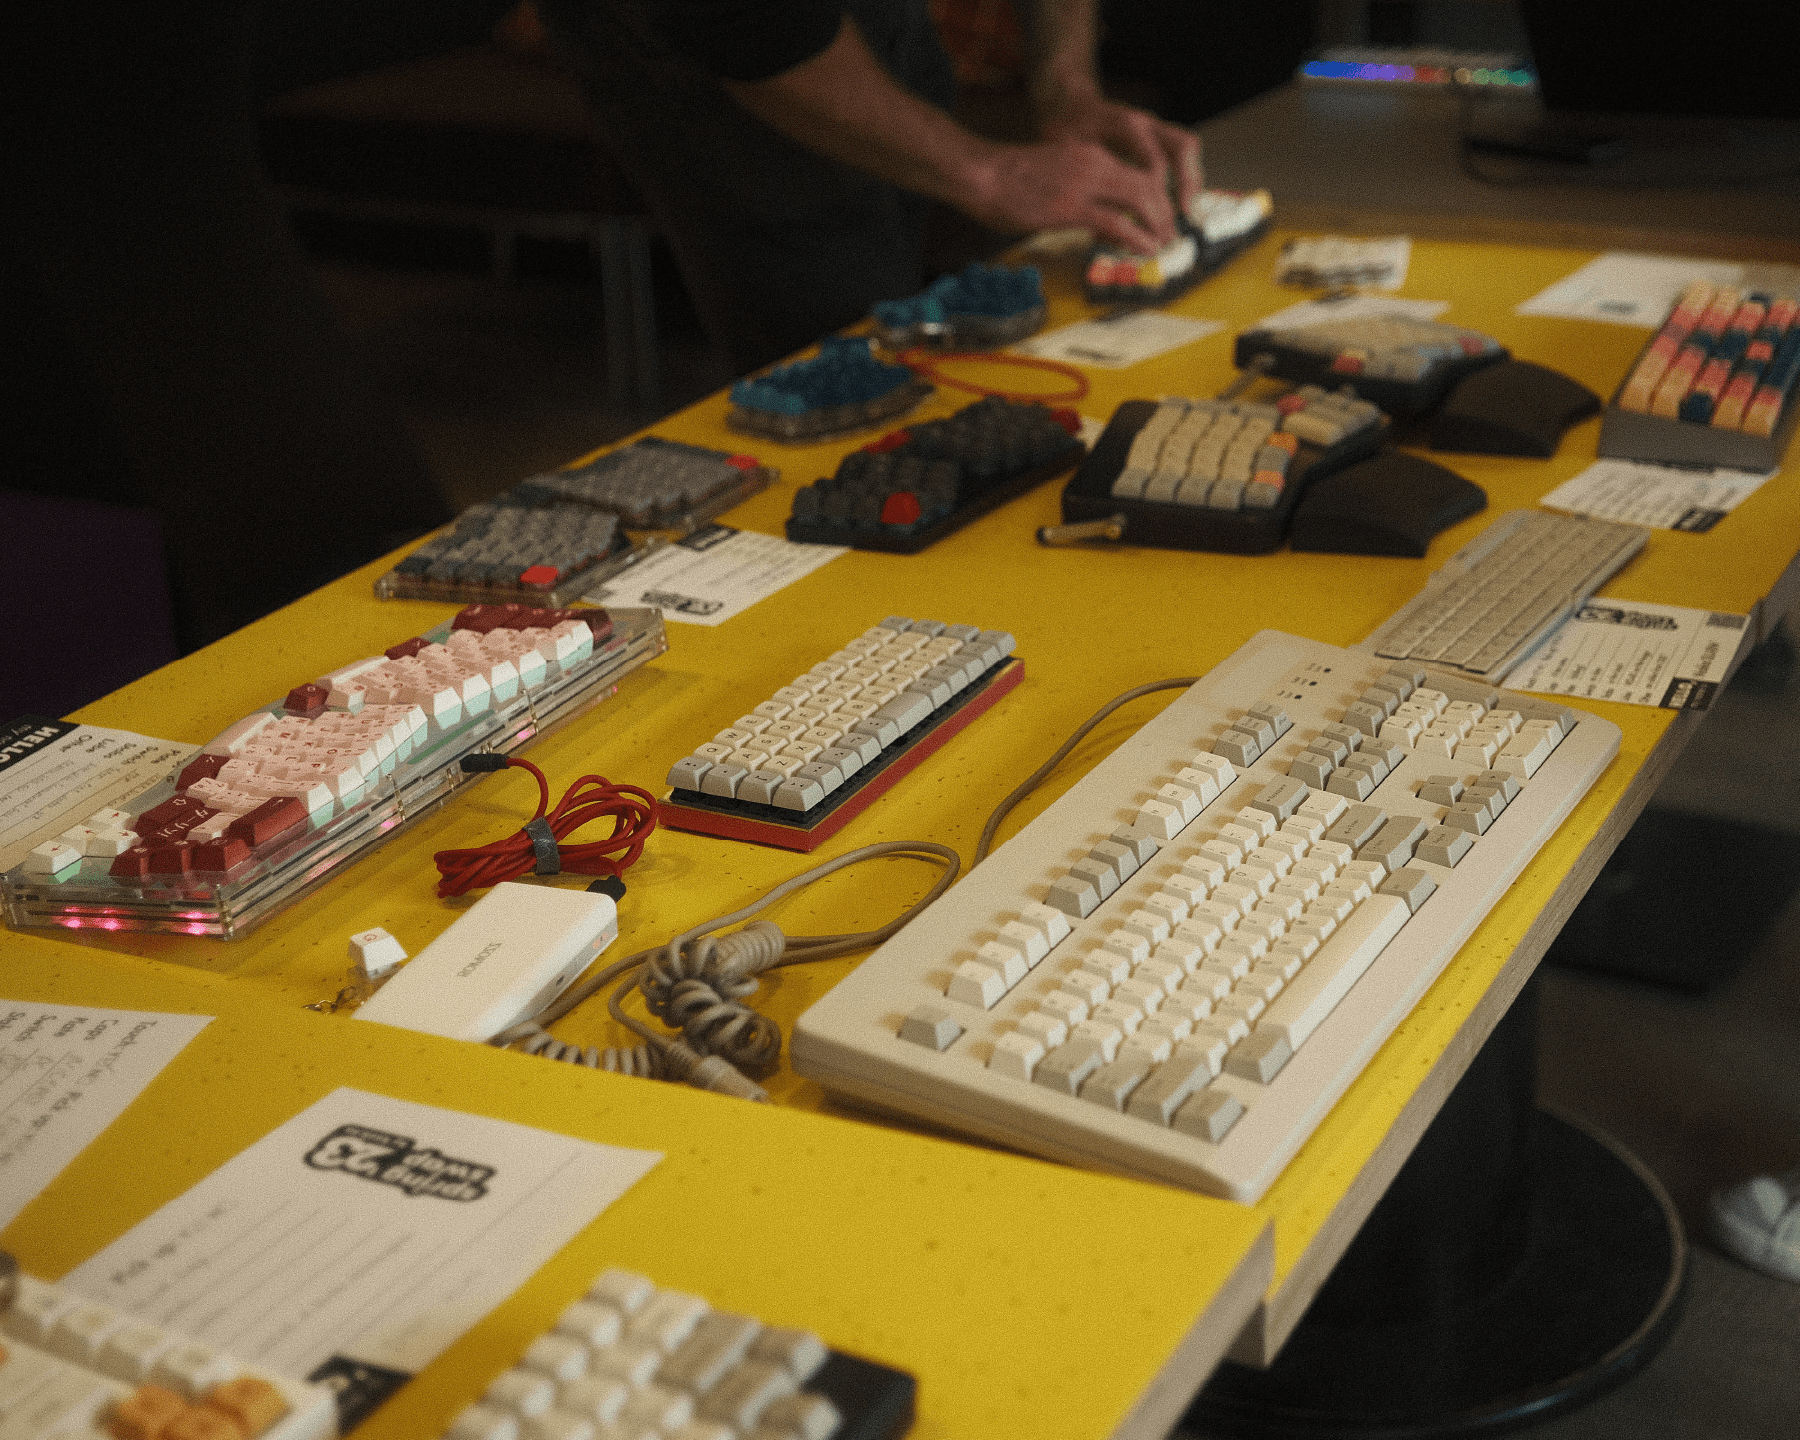 Third meetup, collection of different keyboards on the table